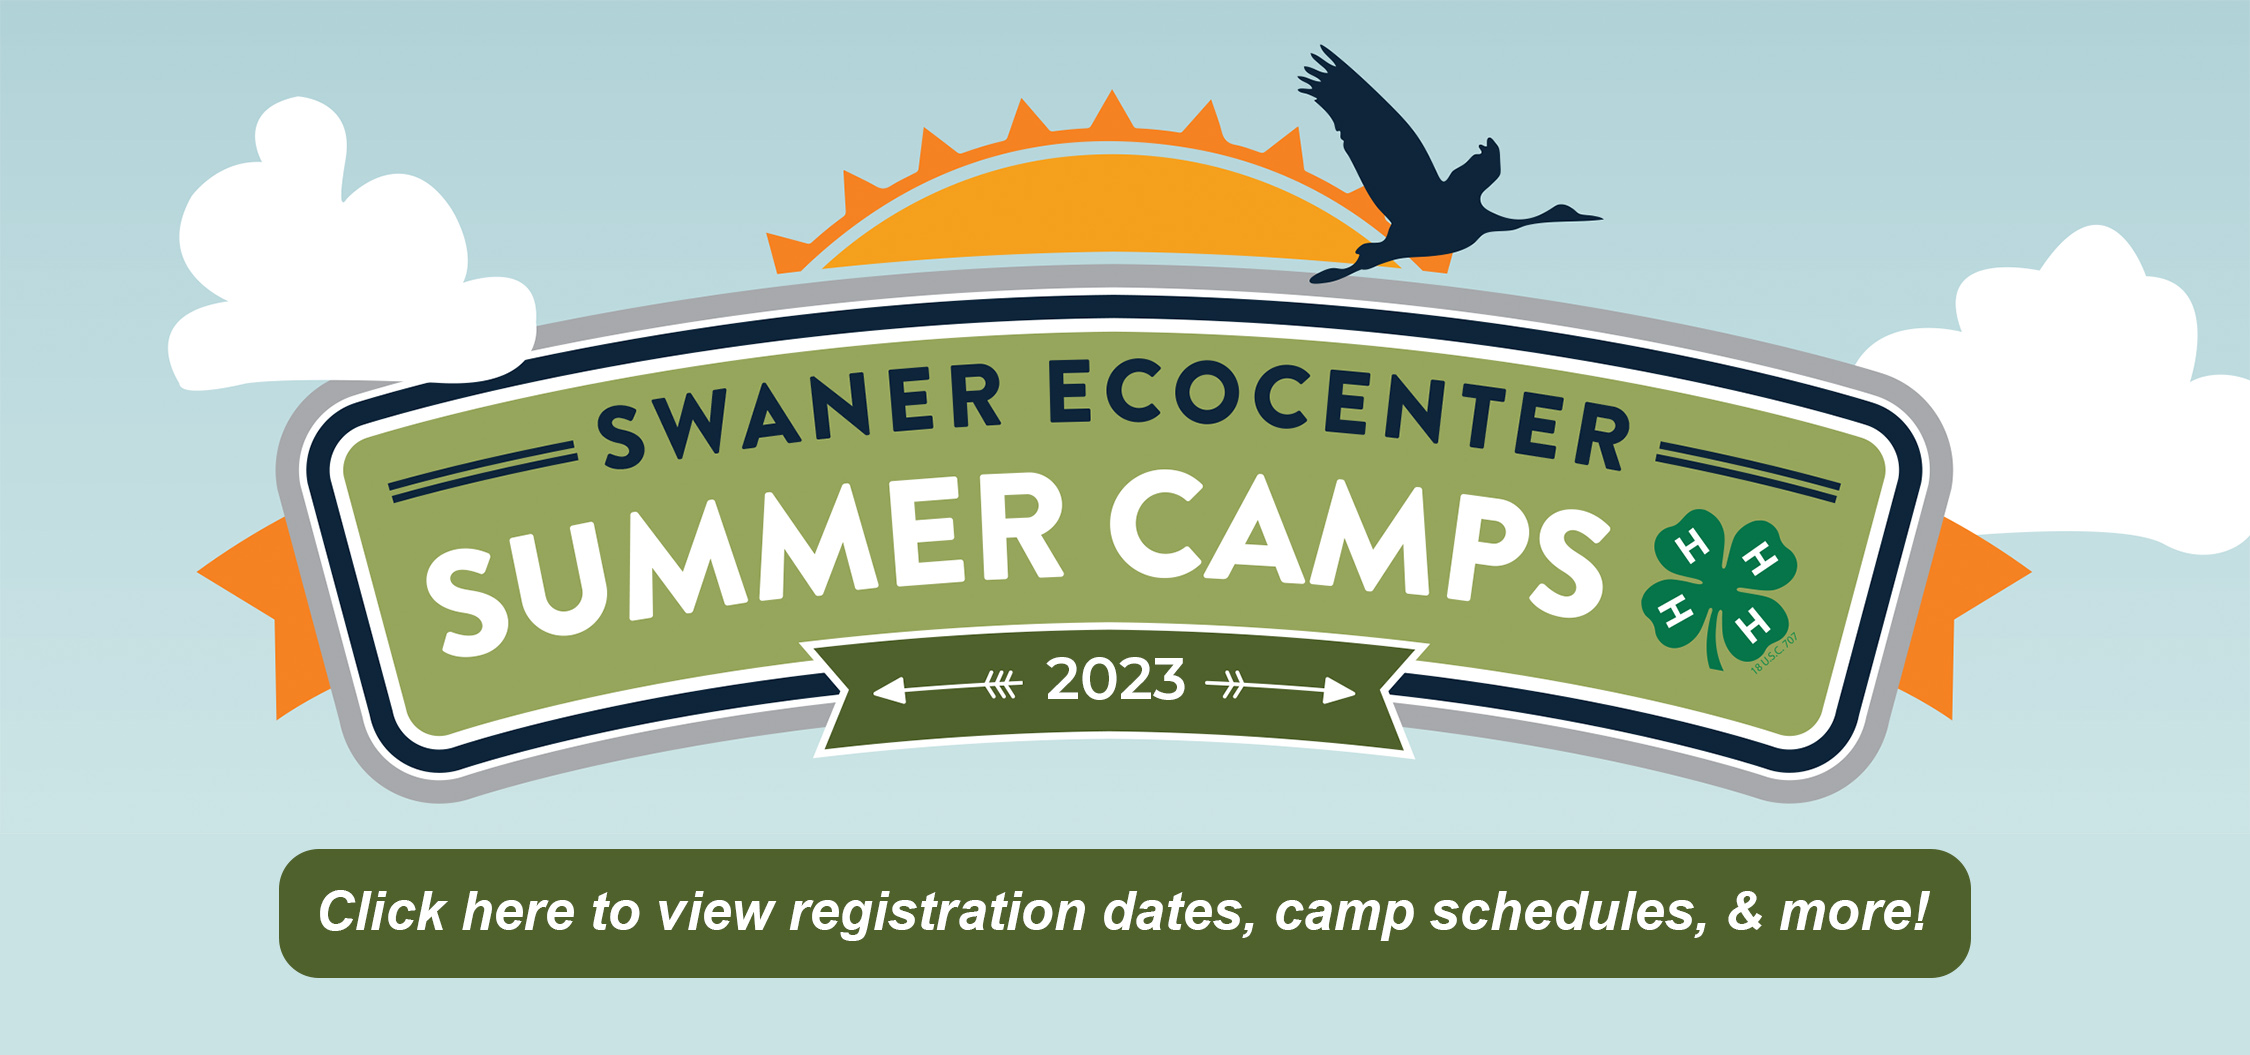 Swaner EcoCenter Summer Camps 2023: Click here to view registration dates, camp schedules, & more!